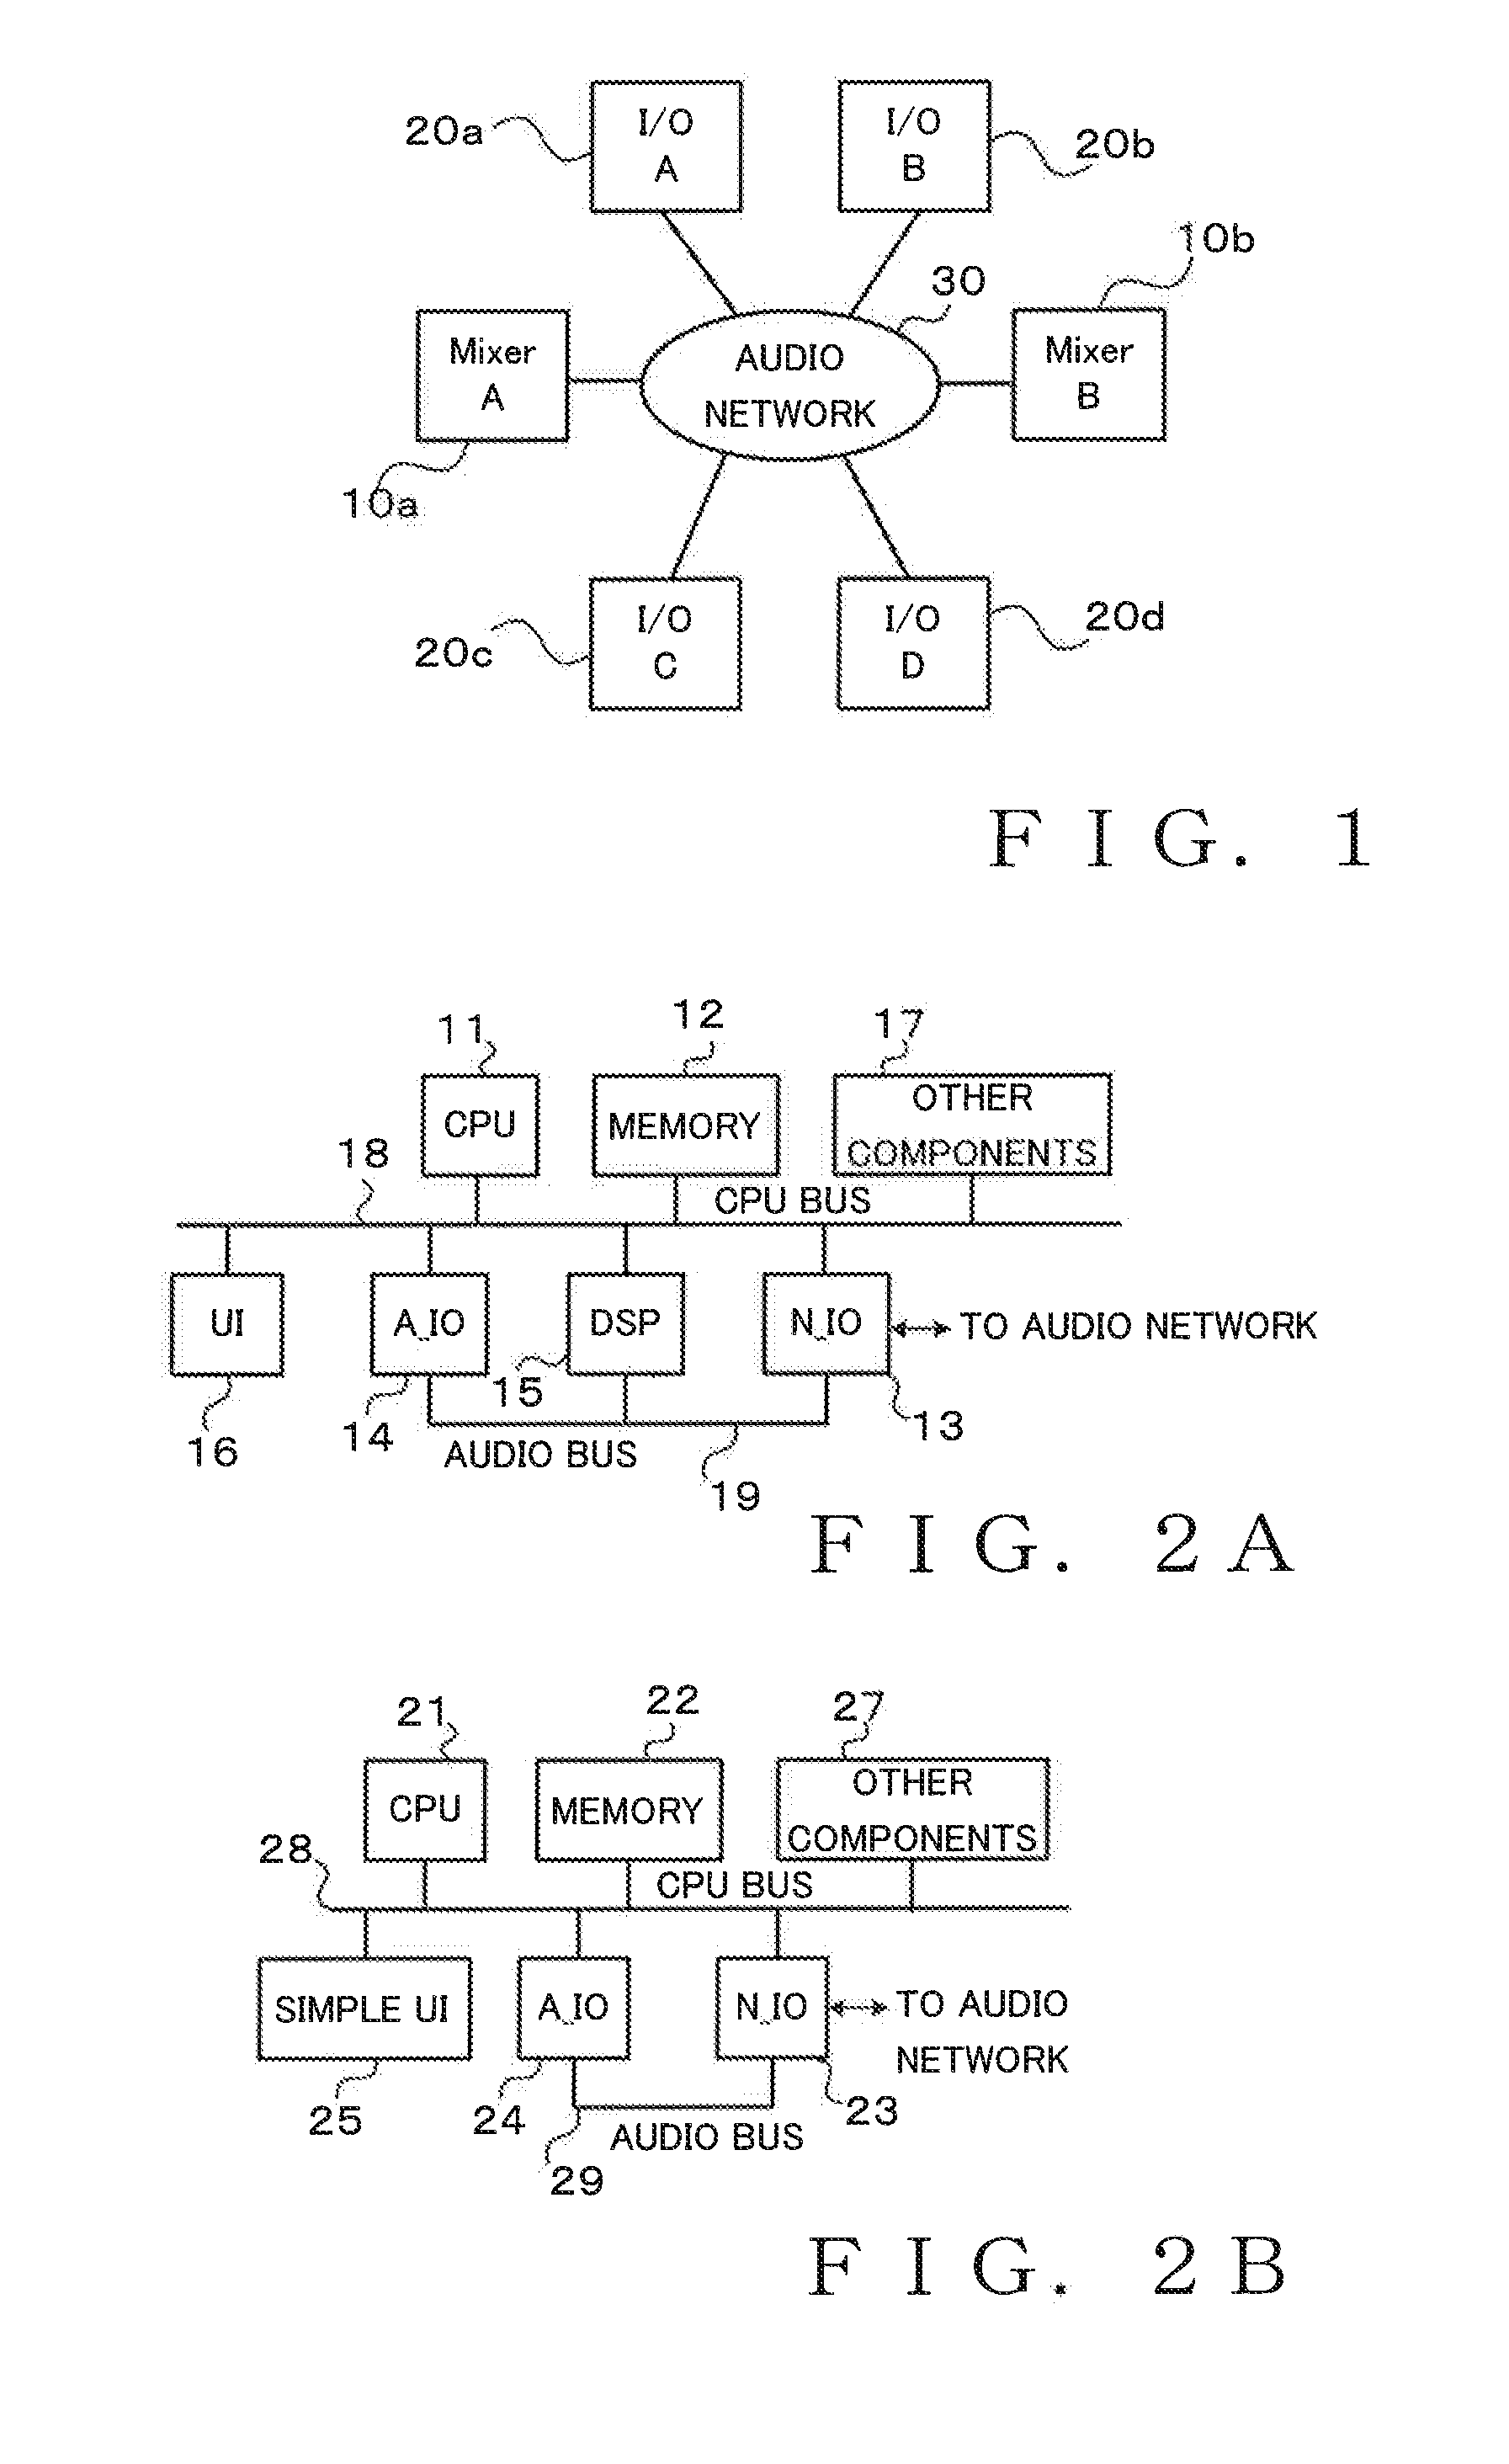 Managing input/output ports in mixer system using virtual port data